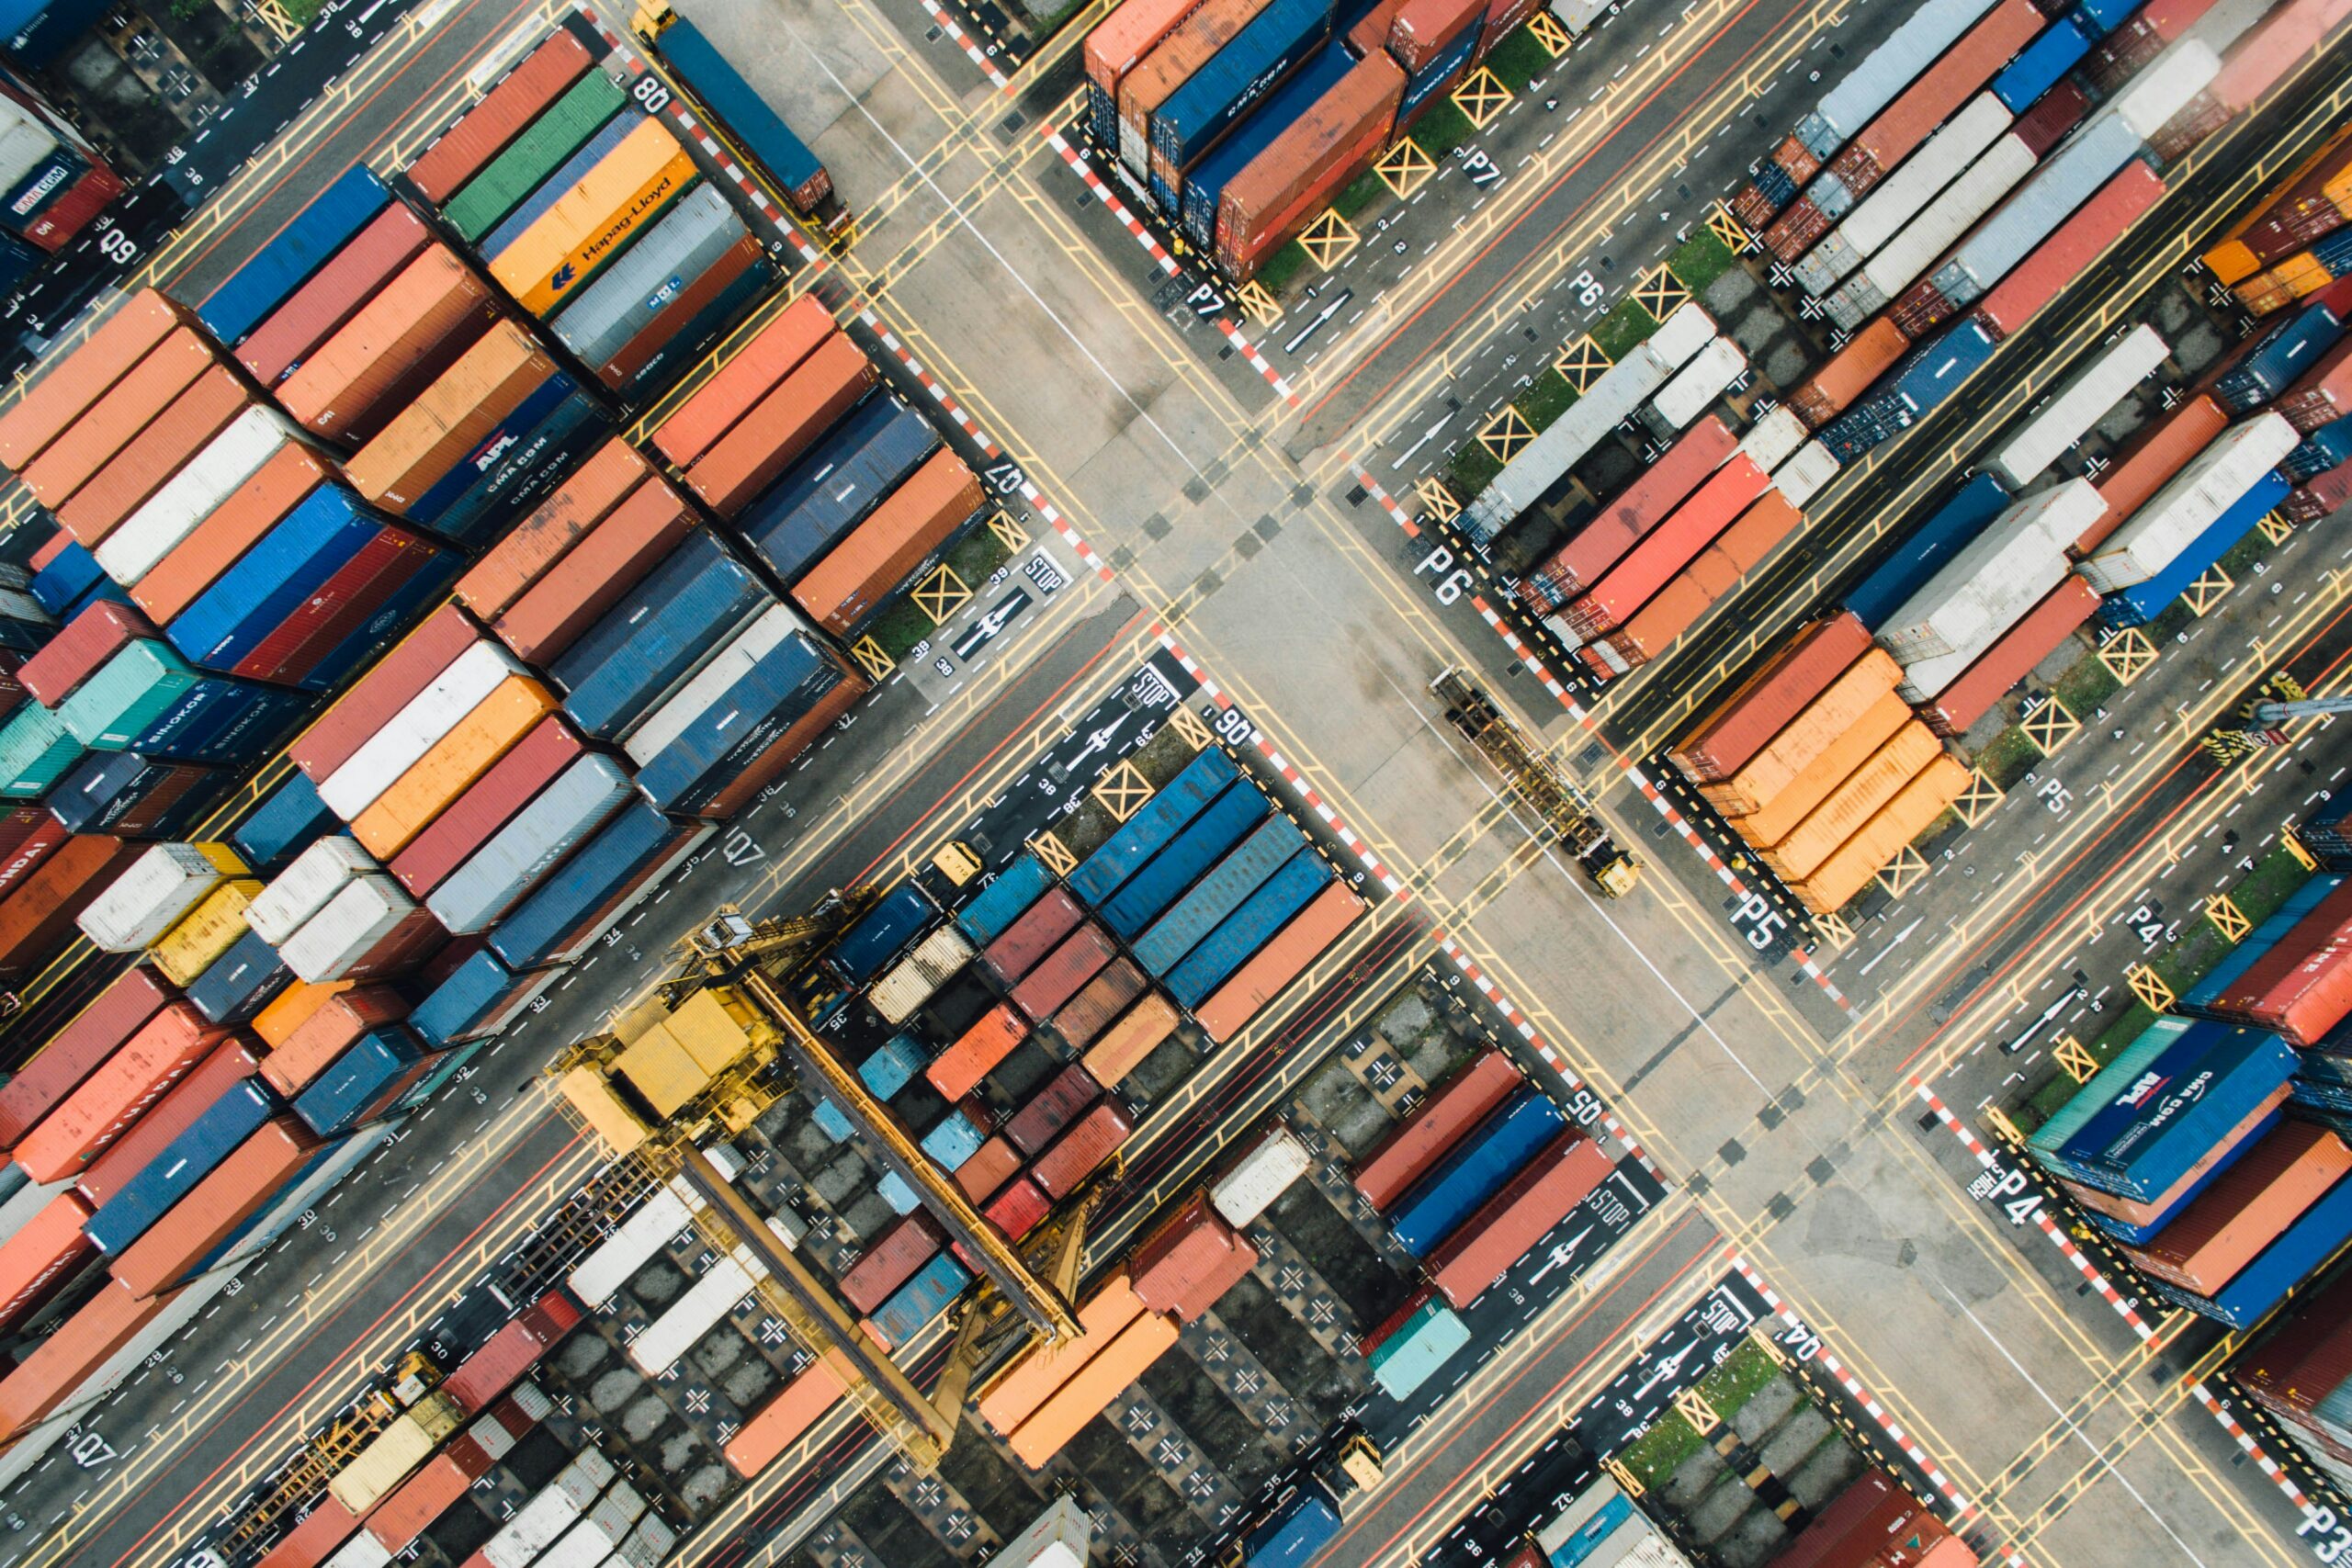 Logistics is an underexposed, often misunderstood sector offering incredible role diversity, great pay, some of the most rapid progression prospects of any career anywhere, delivering complex work that’s essential to the modern world.